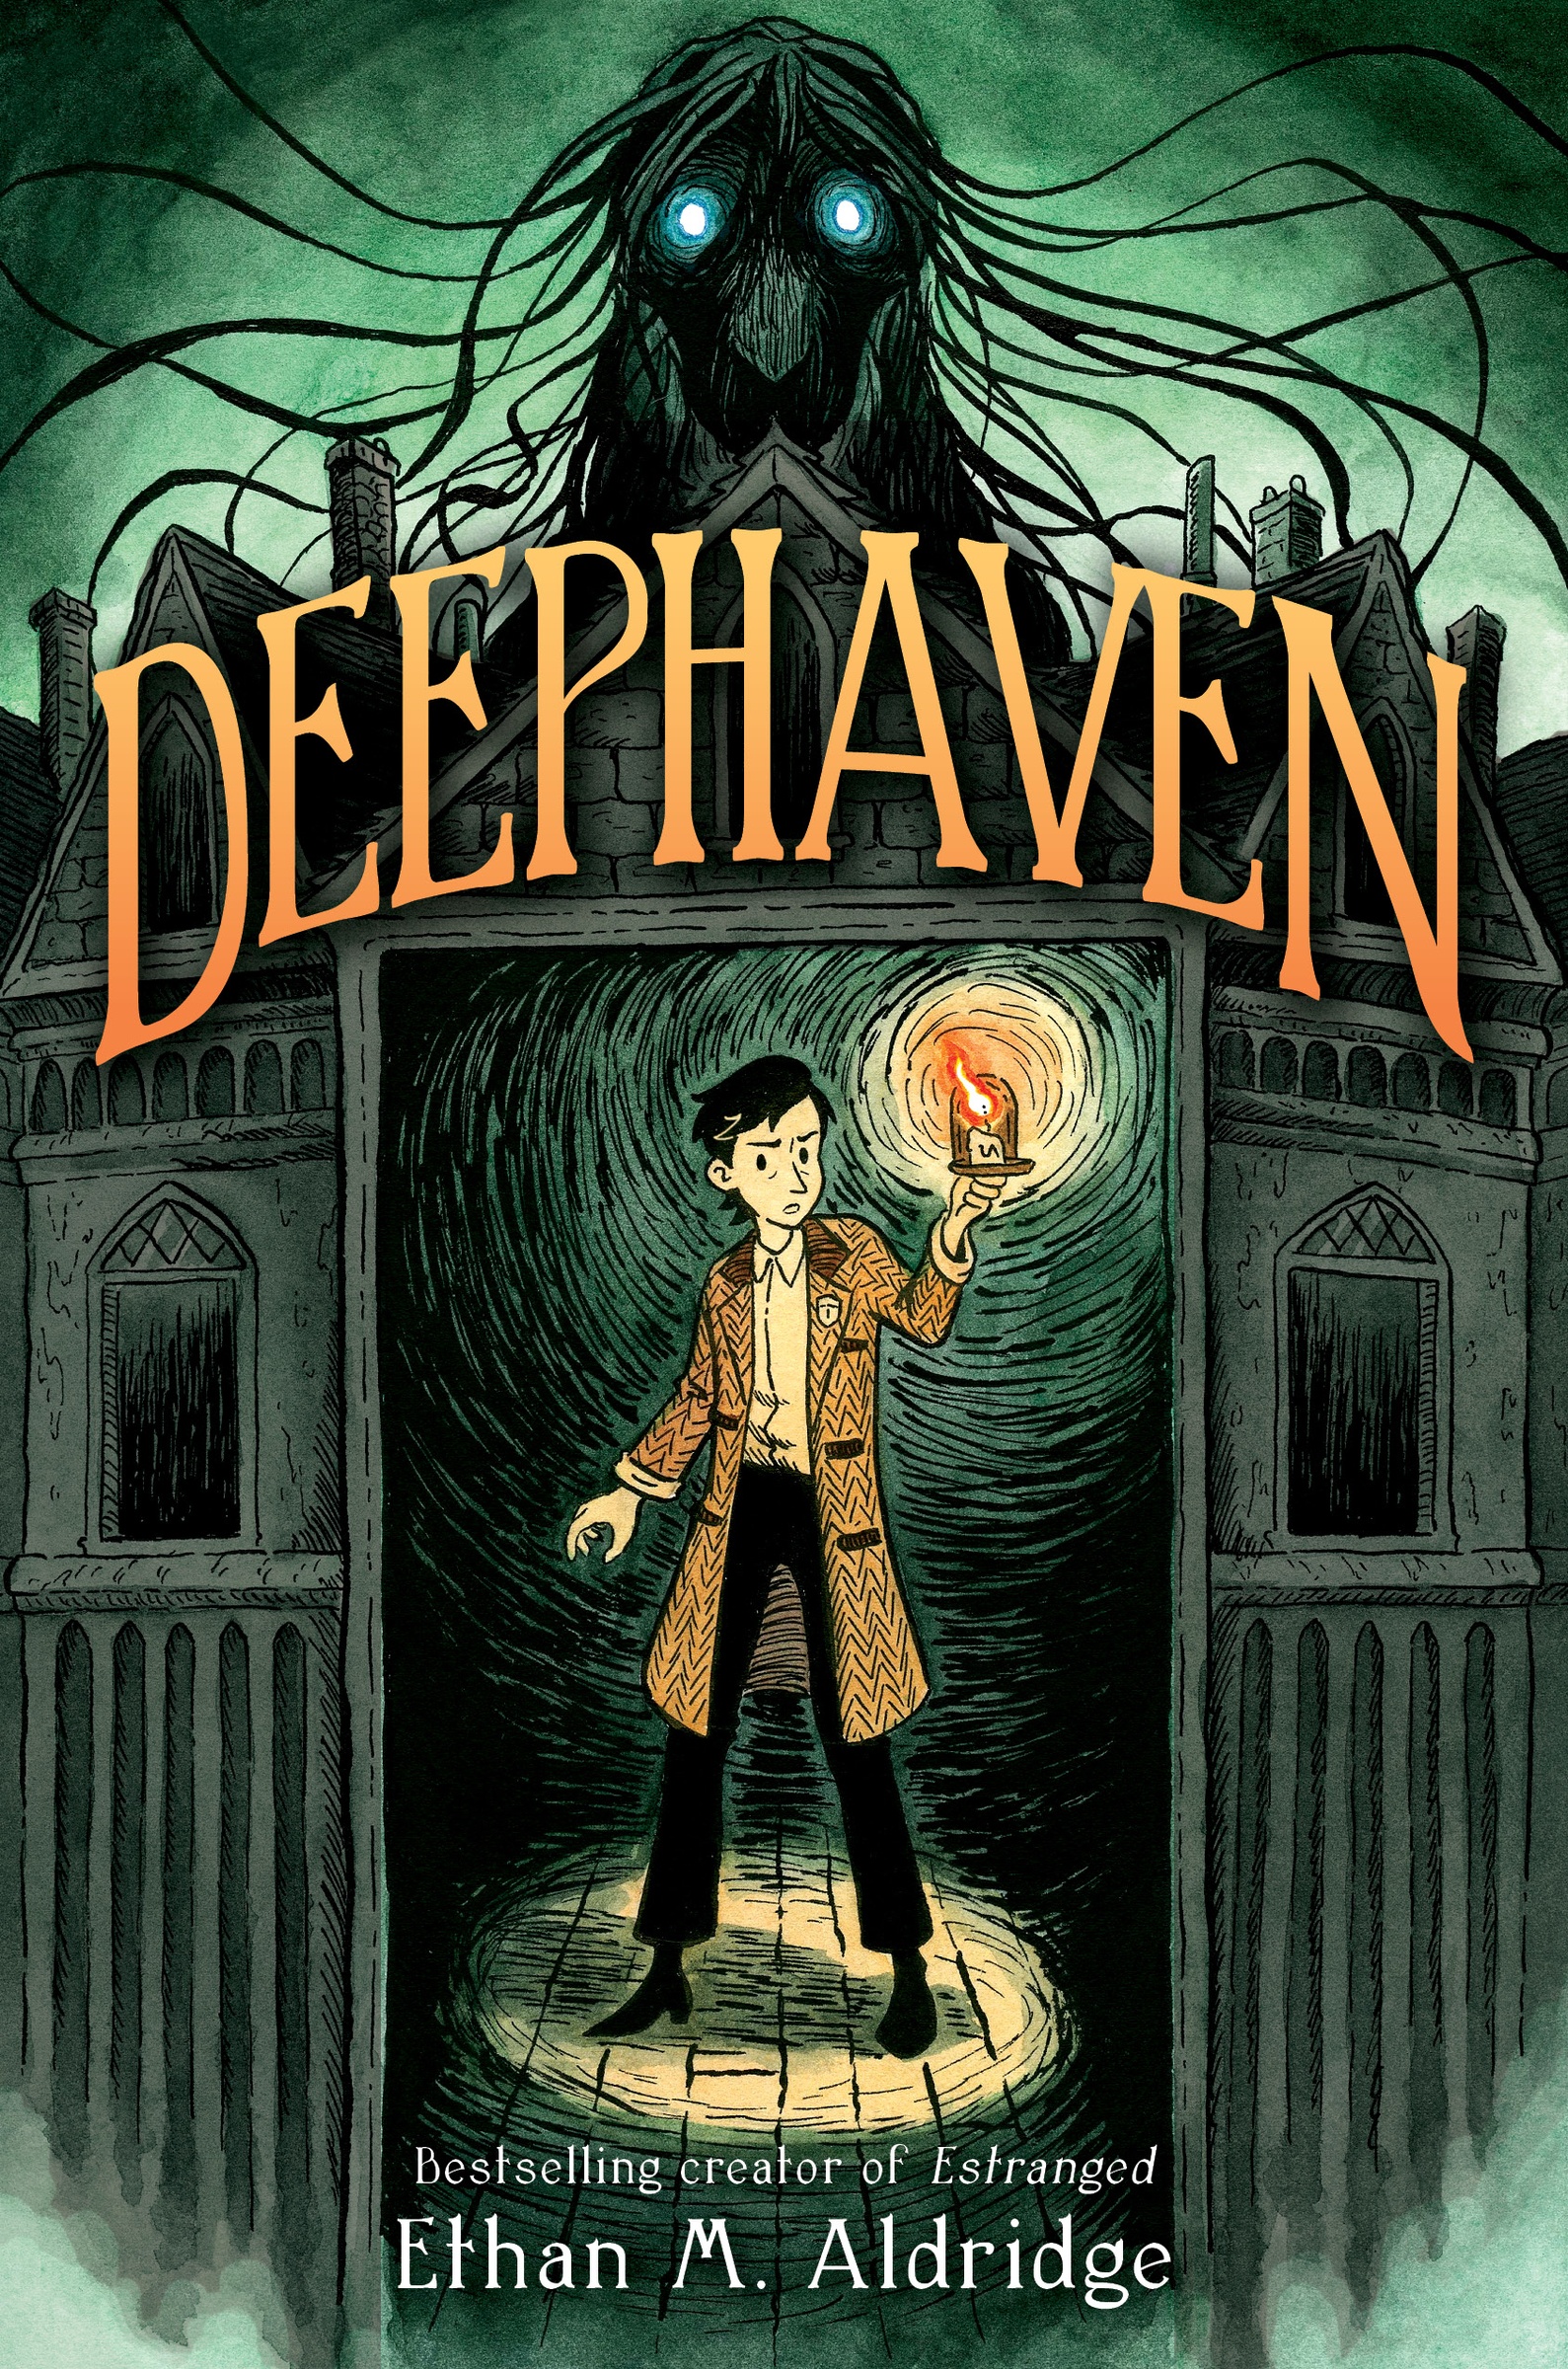 Deephaven cover image